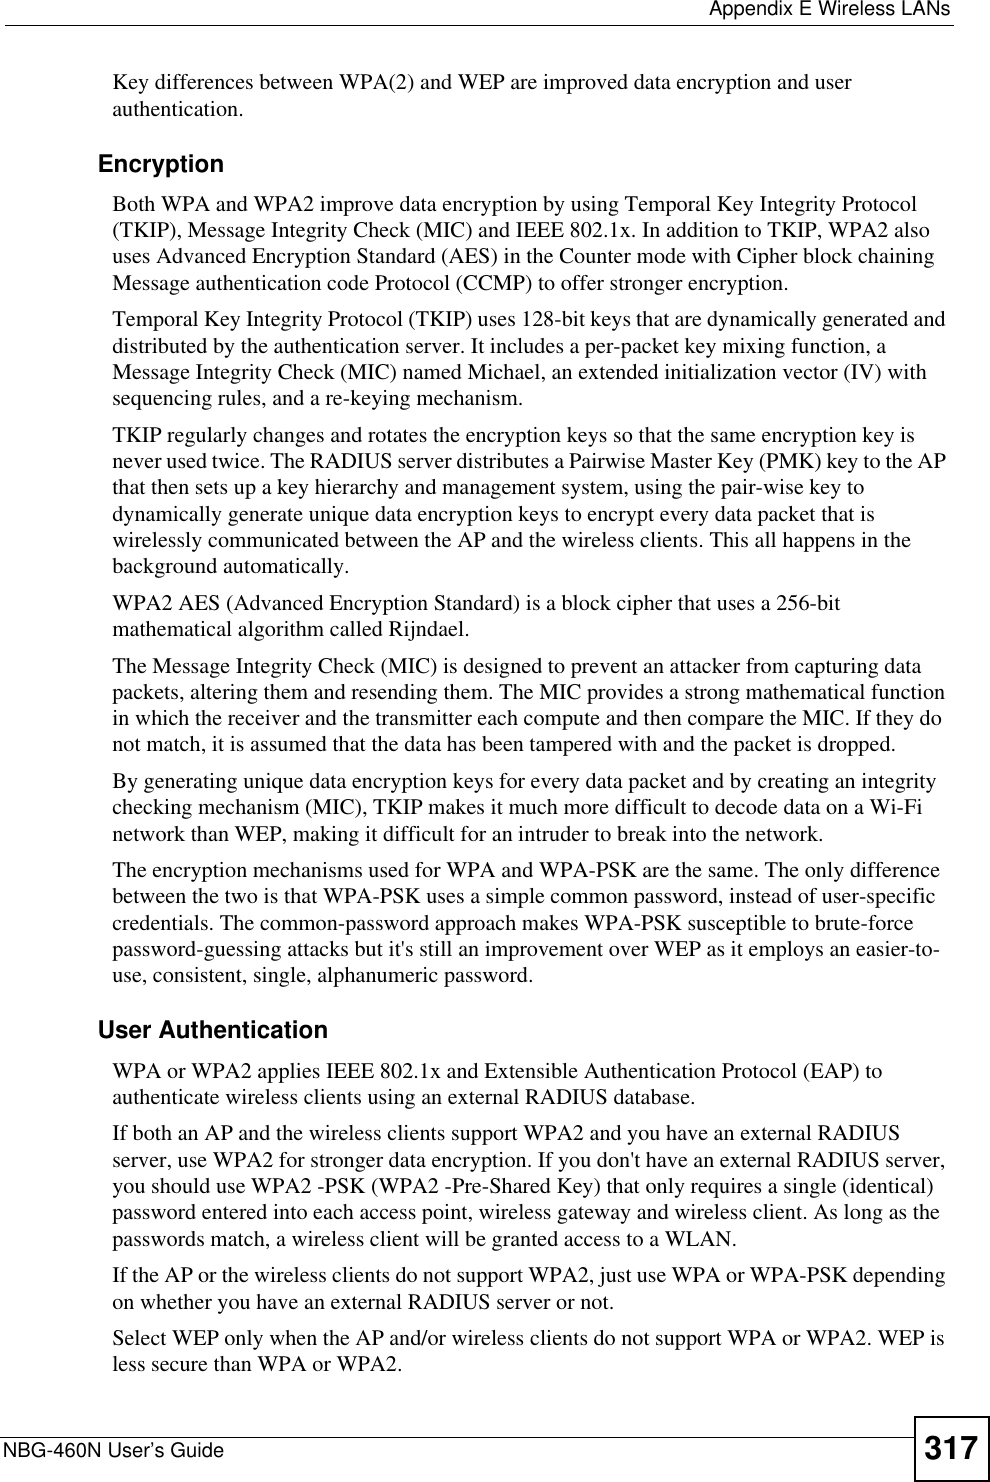  Appendix E Wireless LANsNBG-460N User’s Guide 317Key differences between WPA(2) and WEP are improved data encryption and user authentication.    EncryptionBoth WPA and WPA2 improve data encryption by using Temporal Key Integrity Protocol (TKIP), Message Integrity Check (MIC) and IEEE 802.1x. In addition to TKIP, WPA2 also uses Advanced Encryption Standard (AES) in the Counter mode with Cipher block chaining Message authentication code Protocol (CCMP) to offer stronger encryption. Temporal Key Integrity Protocol (TKIP) uses 128-bit keys that are dynamically generated and distributed by the authentication server. It includes a per-packet key mixing function, a Message Integrity Check (MIC) named Michael, an extended initialization vector (IV) with sequencing rules, and a re-keying mechanism.TKIP regularly changes and rotates the encryption keys so that the same encryption key is never used twice. The RADIUS server distributes a Pairwise Master Key (PMK) key to the AP that then sets up a key hierarchy and management system, using the pair-wise key to dynamically generate unique data encryption keys to encrypt every data packet that is wirelessly communicated between the AP and the wireless clients. This all happens in the background automatically.WPA2 AES (Advanced Encryption Standard) is a block cipher that uses a 256-bit mathematical algorithm called Rijndael.The Message Integrity Check (MIC) is designed to prevent an attacker from capturing data packets, altering them and resending them. The MIC provides a strong mathematical function in which the receiver and the transmitter each compute and then compare the MIC. If they do not match, it is assumed that the data has been tampered with and the packet is dropped. By generating unique data encryption keys for every data packet and by creating an integrity checking mechanism (MIC), TKIP makes it much more difficult to decode data on a Wi-Fi network than WEP, making it difficult for an intruder to break into the network. The encryption mechanisms used for WPA and WPA-PSK are the same. The only difference between the two is that WPA-PSK uses a simple common password, instead of user-specific credentials. The common-password approach makes WPA-PSK susceptible to brute-force password-guessing attacks but it&apos;s still an improvement over WEP as it employs an easier-to-use, consistent, single, alphanumeric password.  User AuthenticationWPA or WPA2 applies IEEE 802.1x and Extensible Authentication Protocol (EAP) to authenticate wireless clients using an external RADIUS database. If both an AP and the wireless clients support WPA2 and you have an external RADIUS server, use WPA2 for stronger data encryption. If you don&apos;t have an external RADIUS server, you should use WPA2 -PSK (WPA2 -Pre-Shared Key) that only requires a single (identical) password entered into each access point, wireless gateway and wireless client. As long as the passwords match, a wireless client will be granted access to a WLAN. If the AP or the wireless clients do not support WPA2, just use WPA or WPA-PSK depending on whether you have an external RADIUS server or not.Select WEP only when the AP and/or wireless clients do not support WPA or WPA2. WEP is less secure than WPA or WPA2.